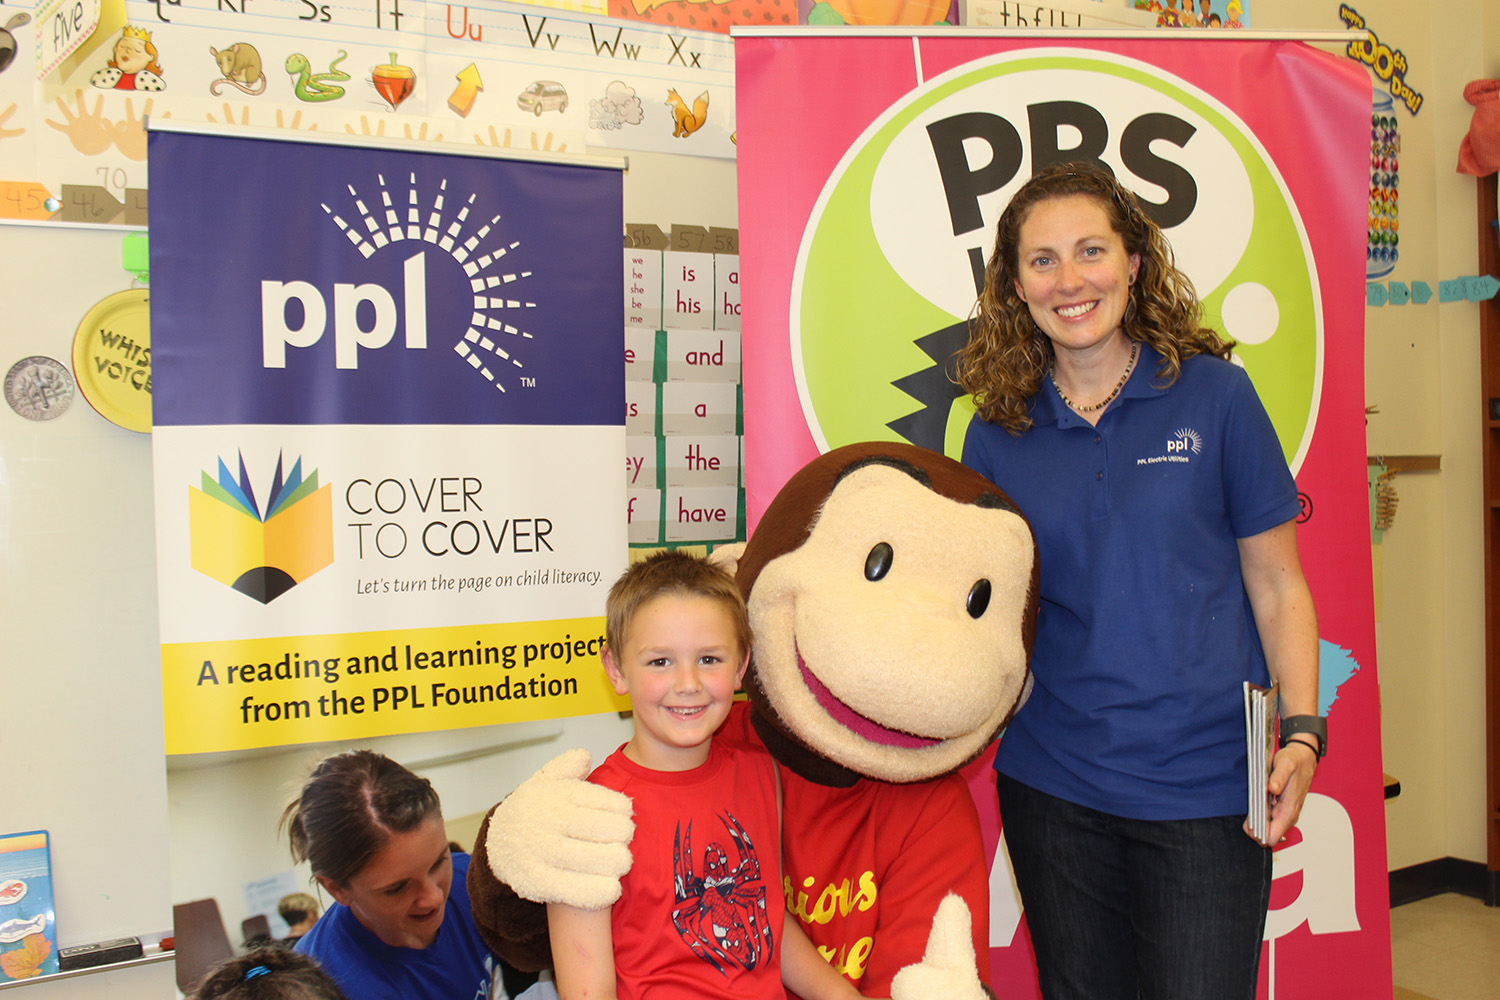 PPL Regional Affairs Director Alana Roberts poses with a youngster at Stourbridge Primary Center in Honesdale, Pa. PPL partnered with WVIA to bring the Cover to Cover program to Stourbridge.